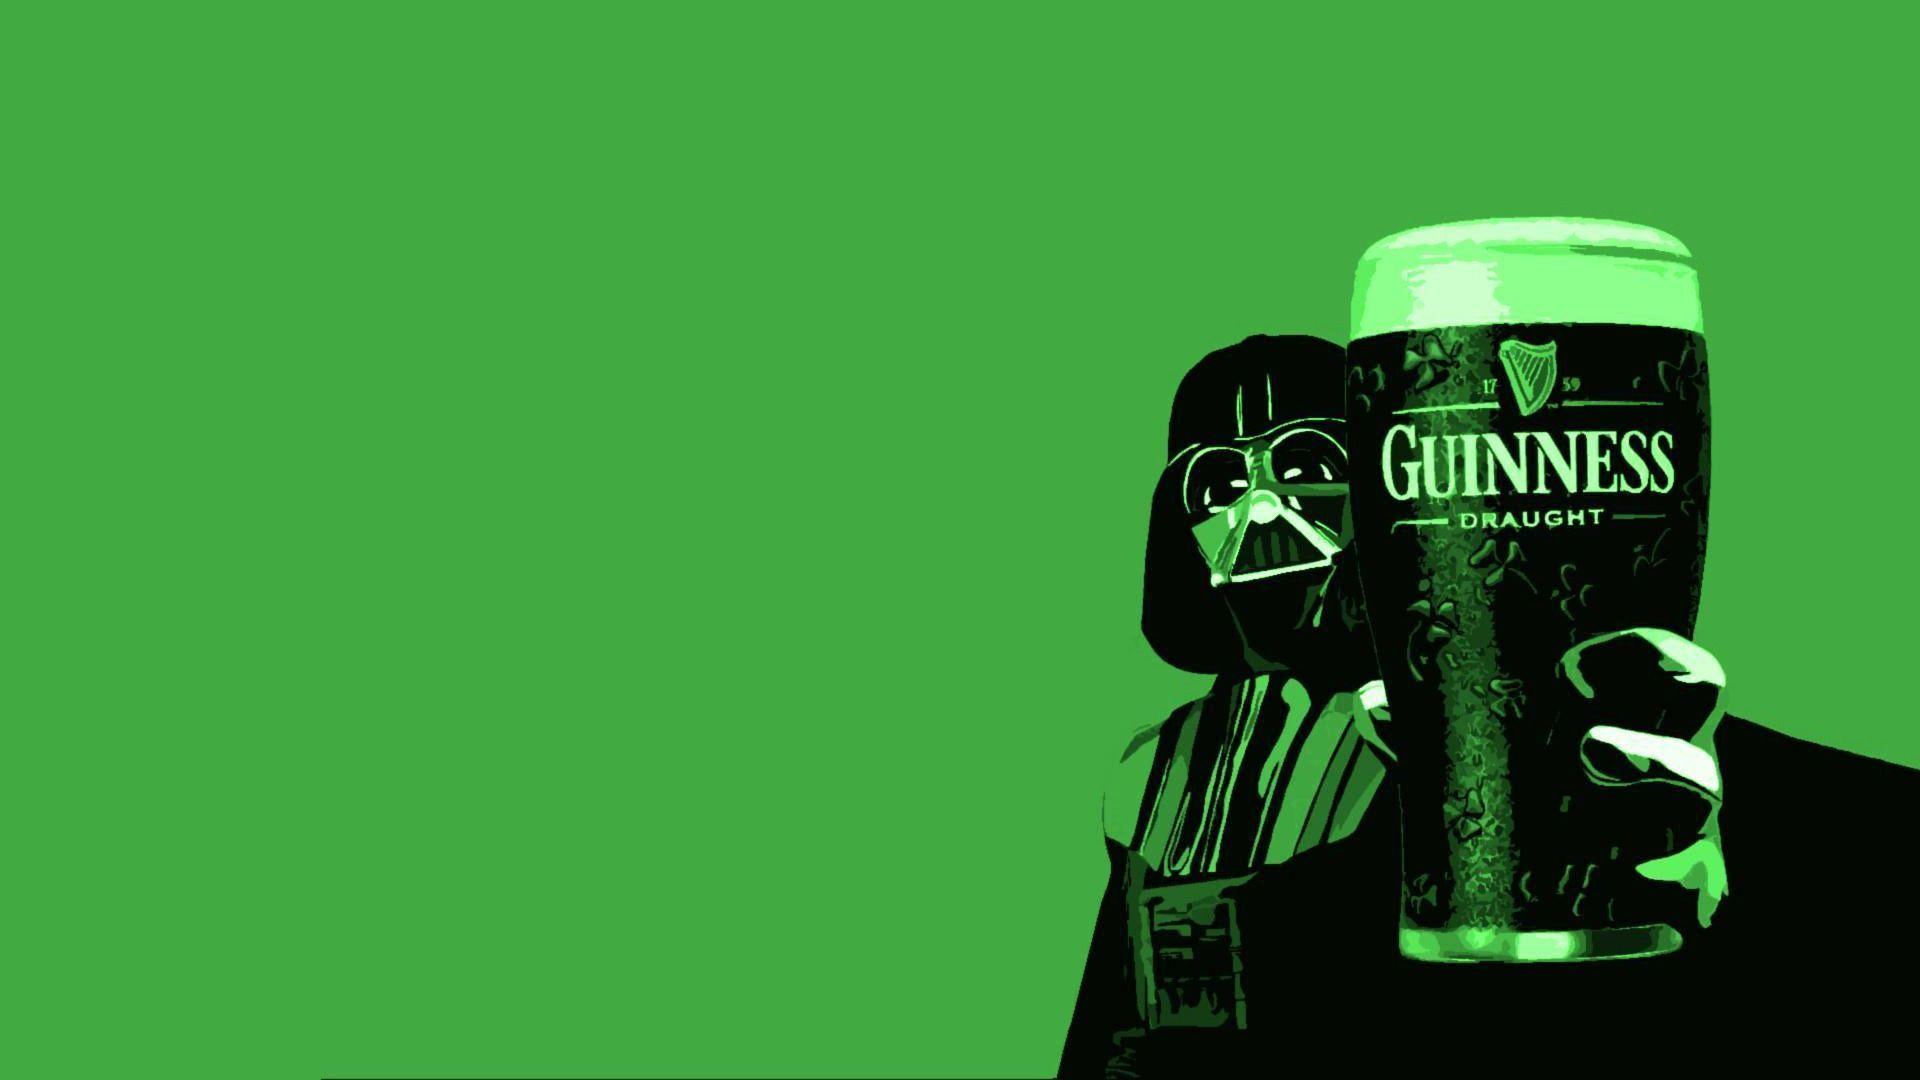 Darth Vader holding a glass of Guiness Wallpaper Image. HD